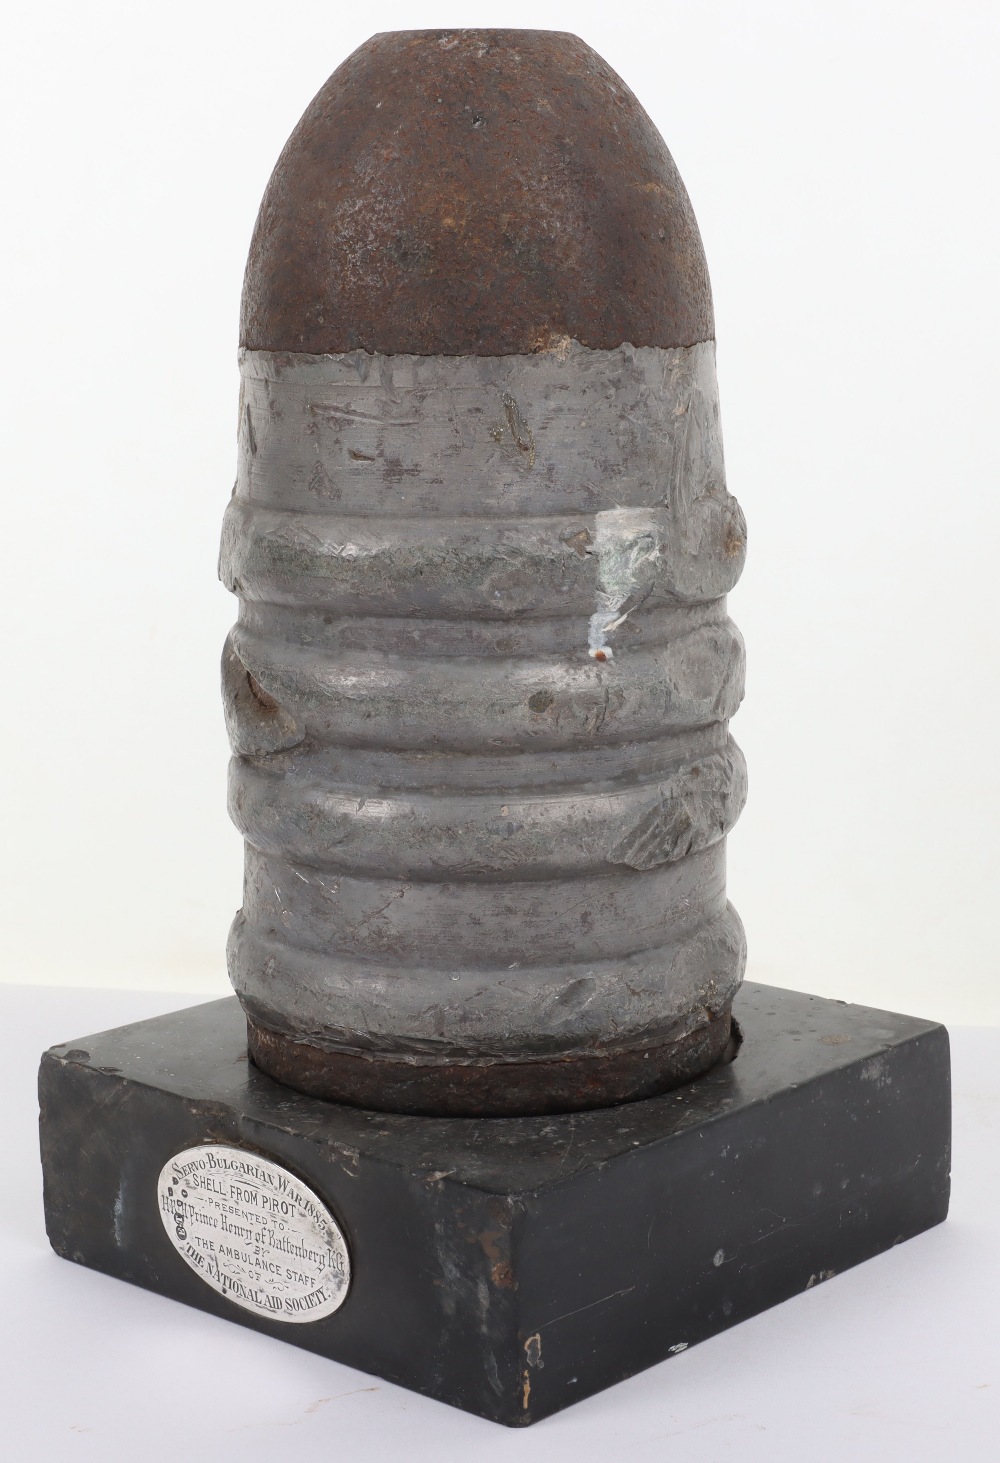 Artillery Shell Head from the Battle of Pirot During the Servo-Bulgarian War 1885 Presented to H.R.H - Image 6 of 8